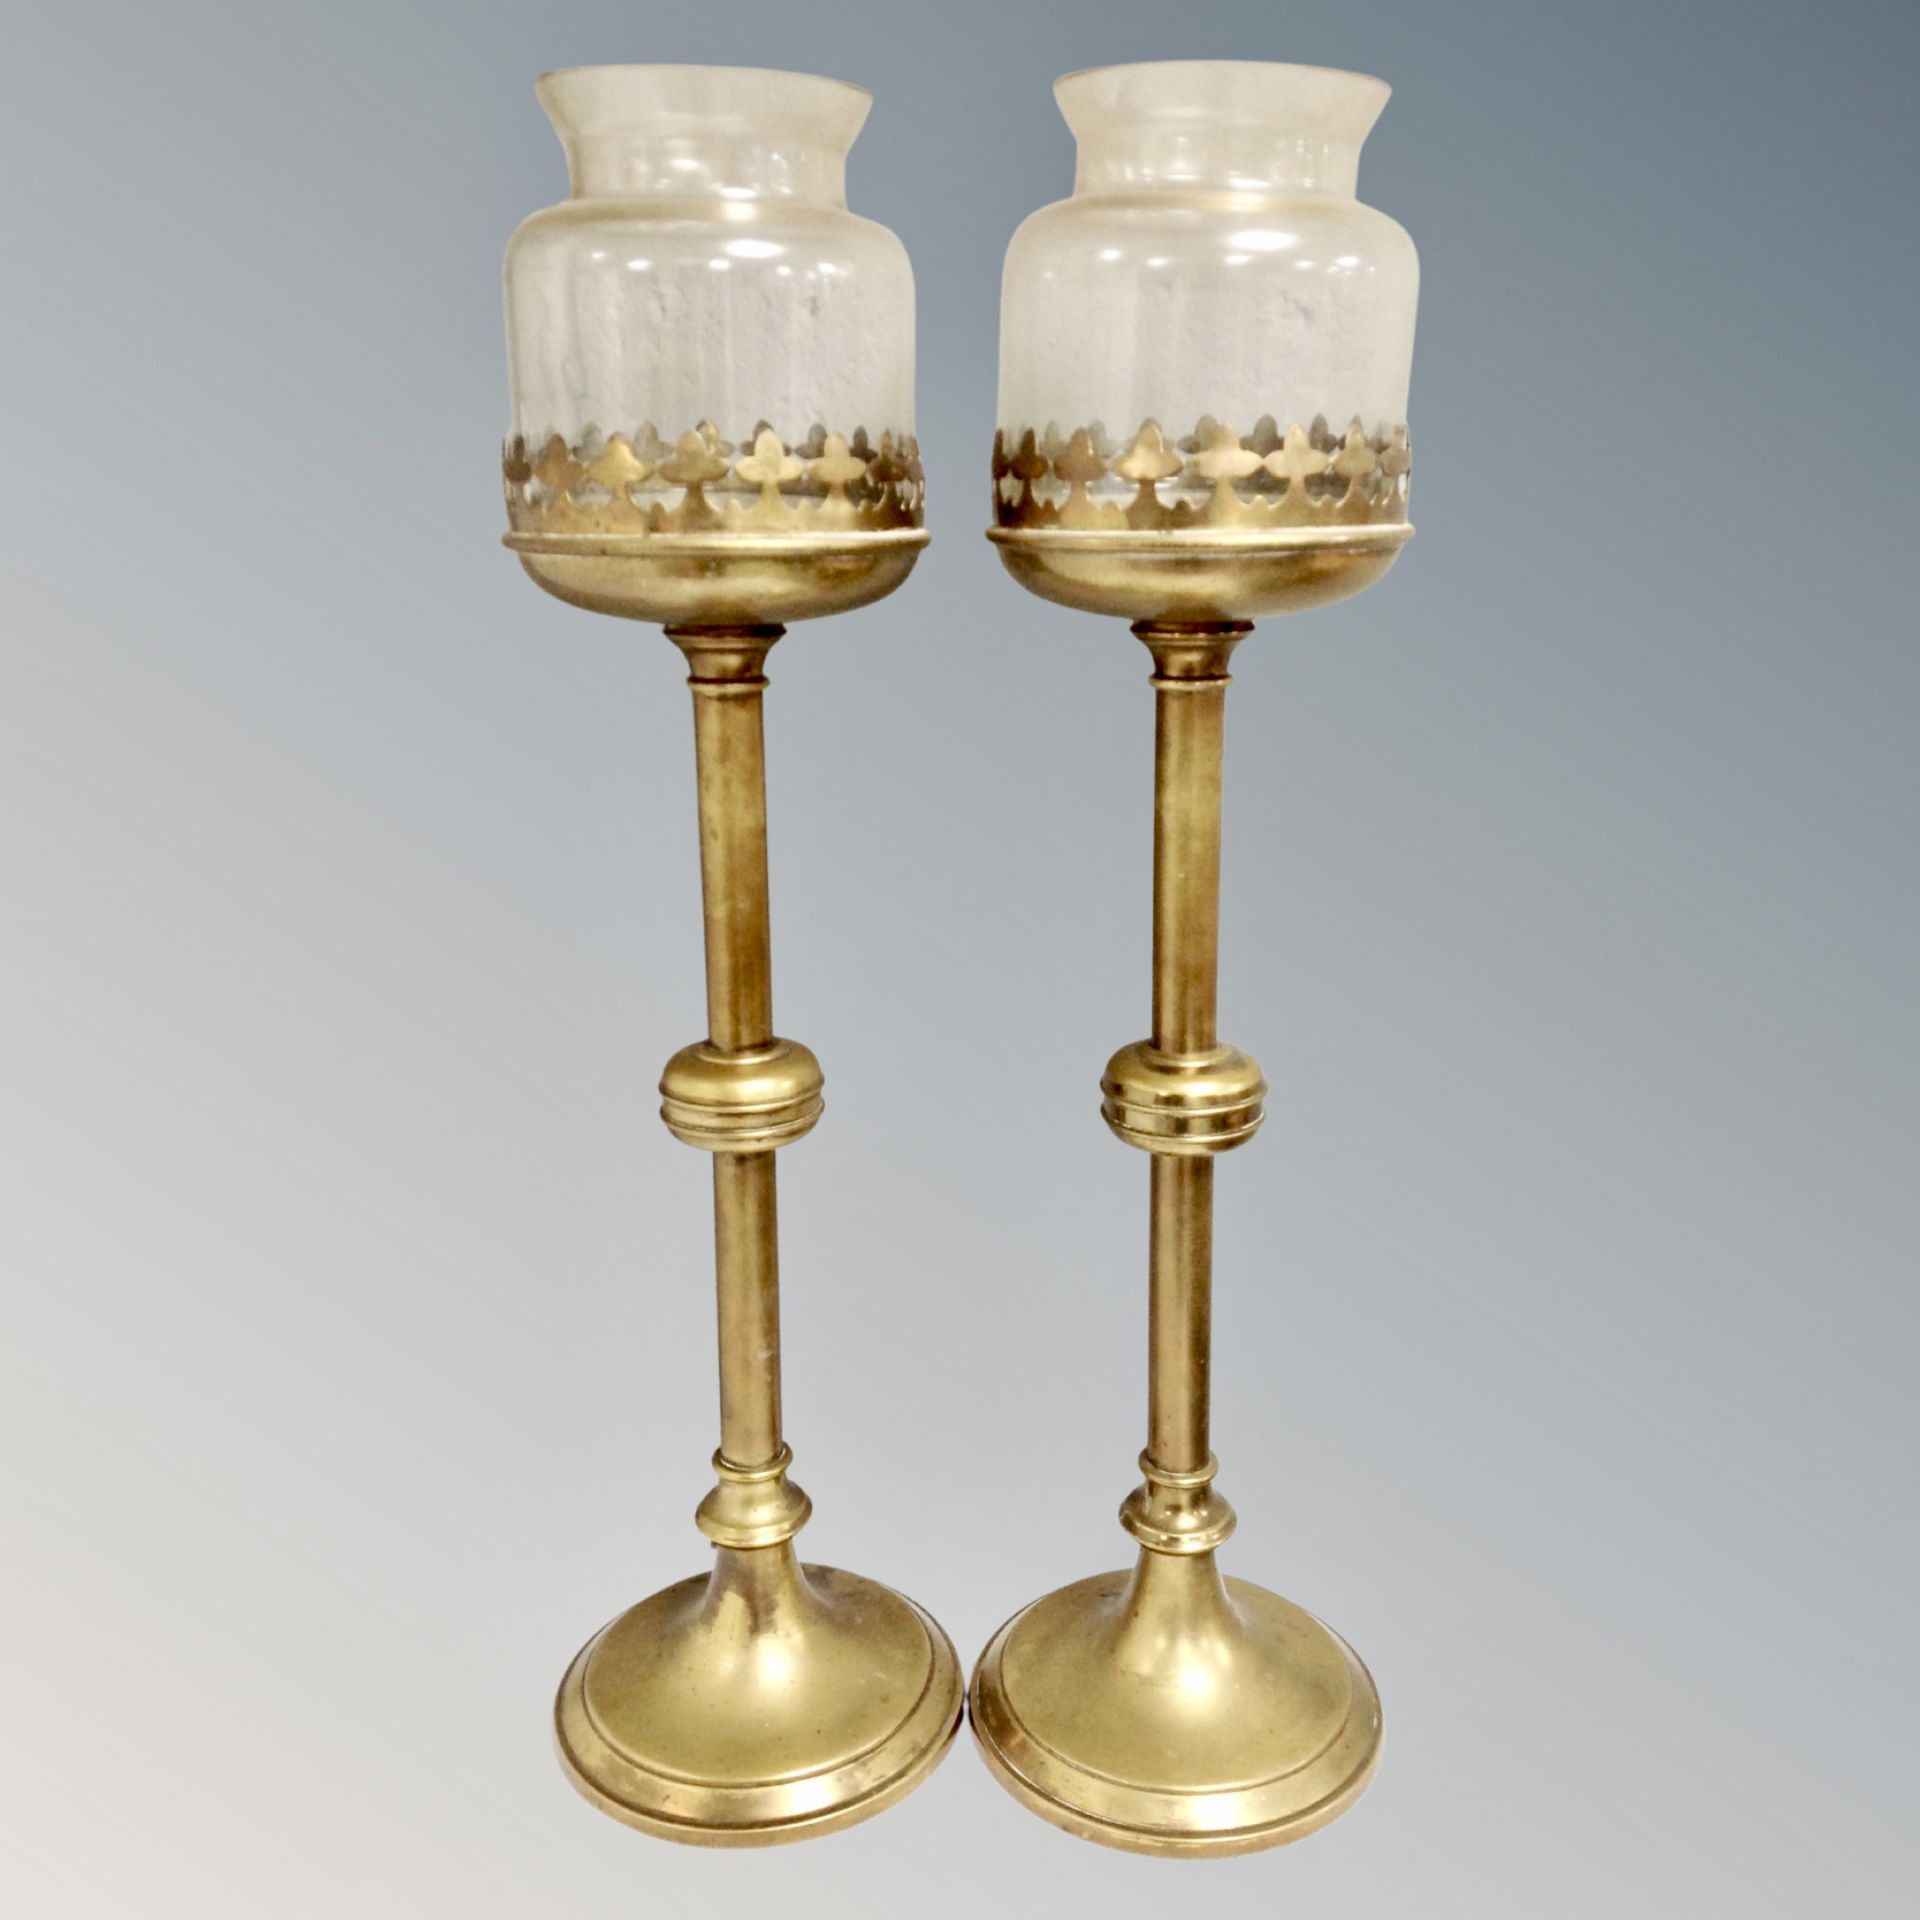 A pair of brass ecclesiastical candlesticks with glass shades,